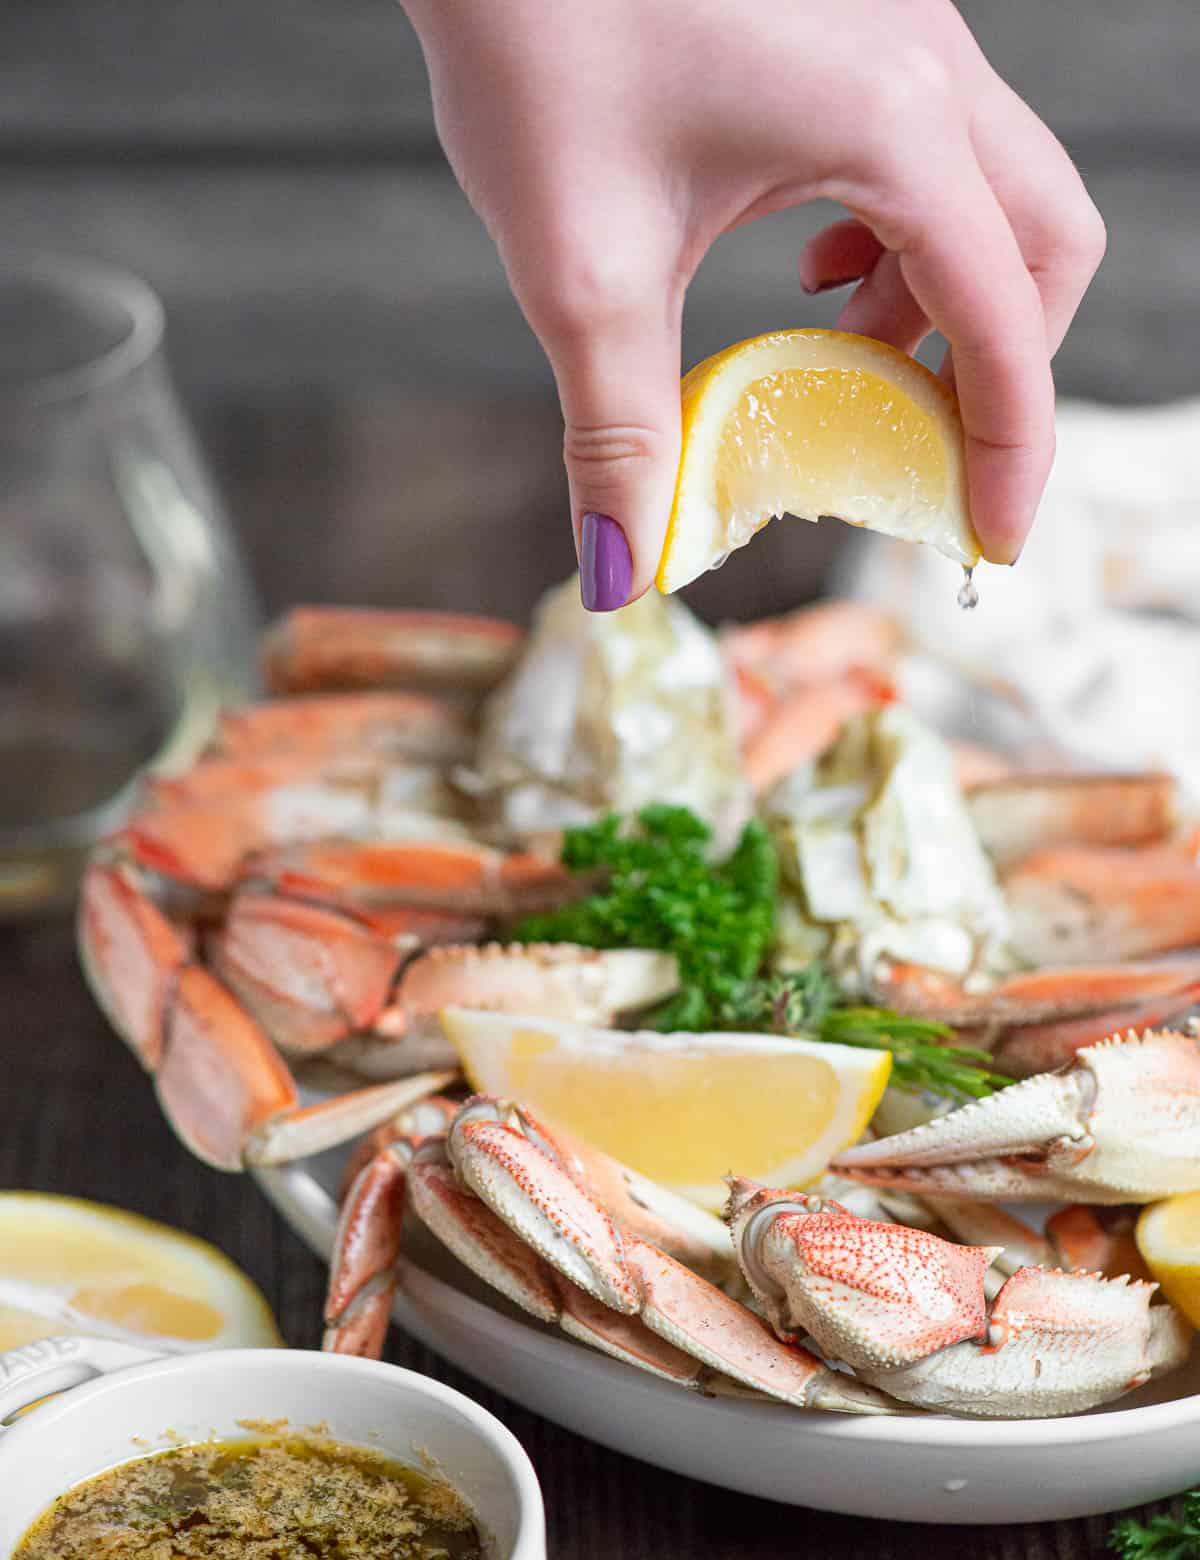 Squeezing lemon on steamed crab legs.